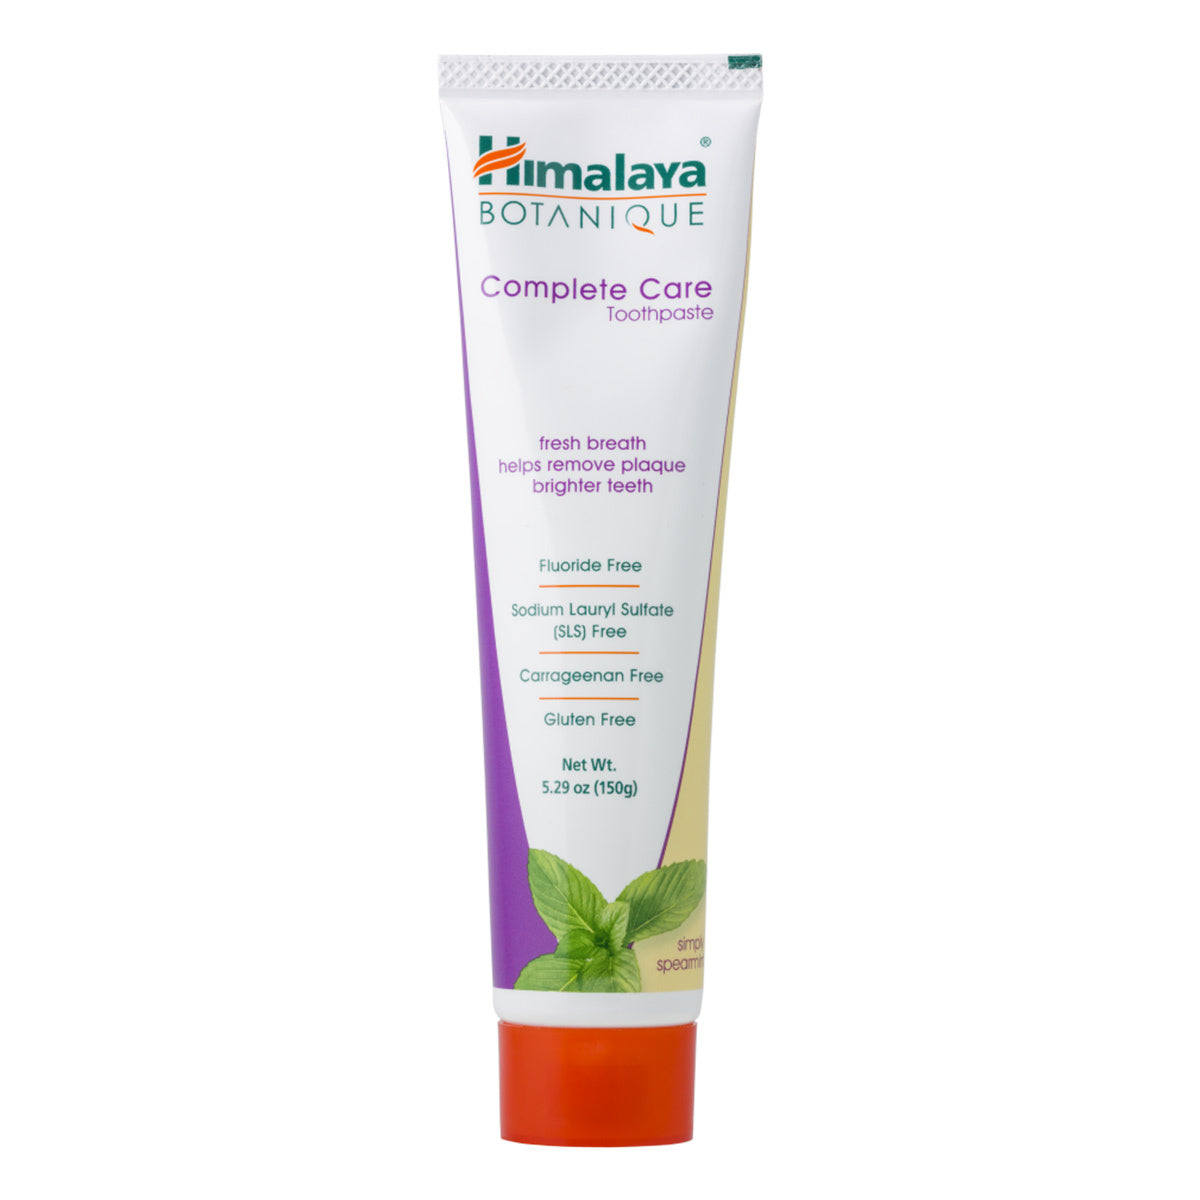 Primary image of Complete Care Simply Spearmint Toothpaste